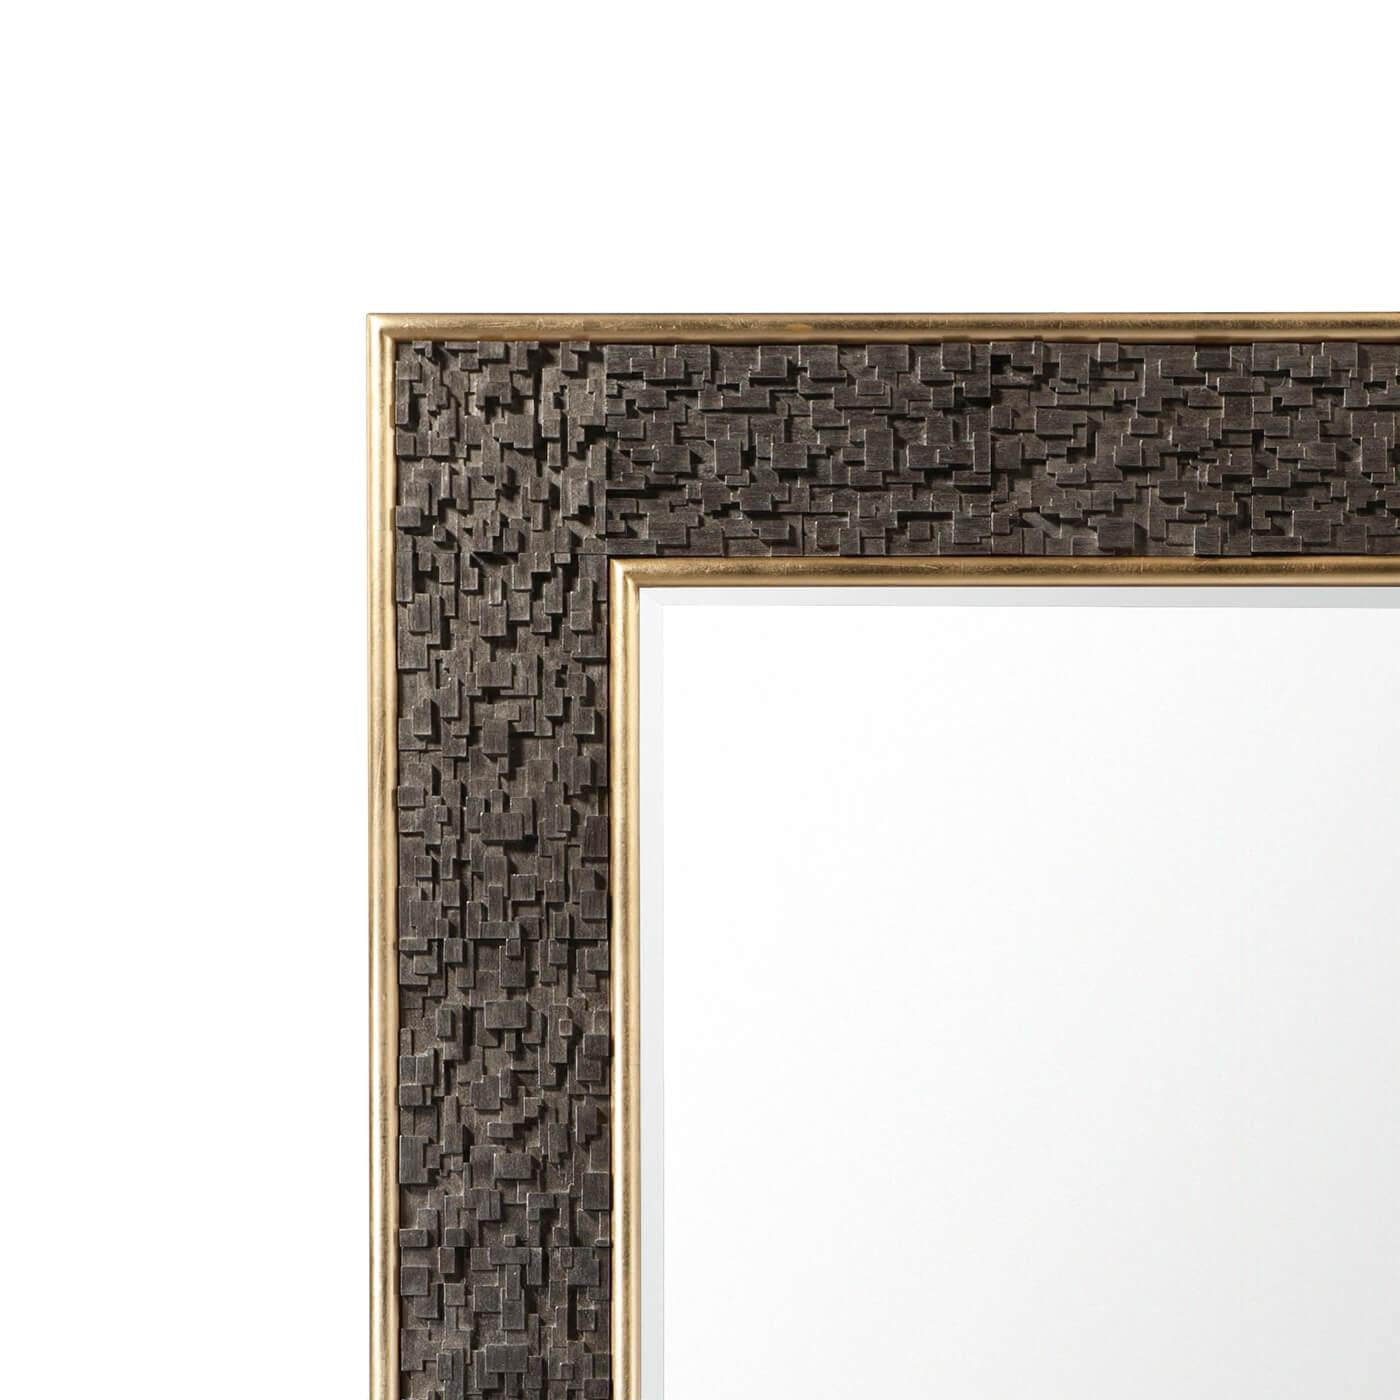 A Mid-Century Modern design composition wall mirror. With an unusual modern relief pattern and a gilded outer frame.

Dimensions: 50